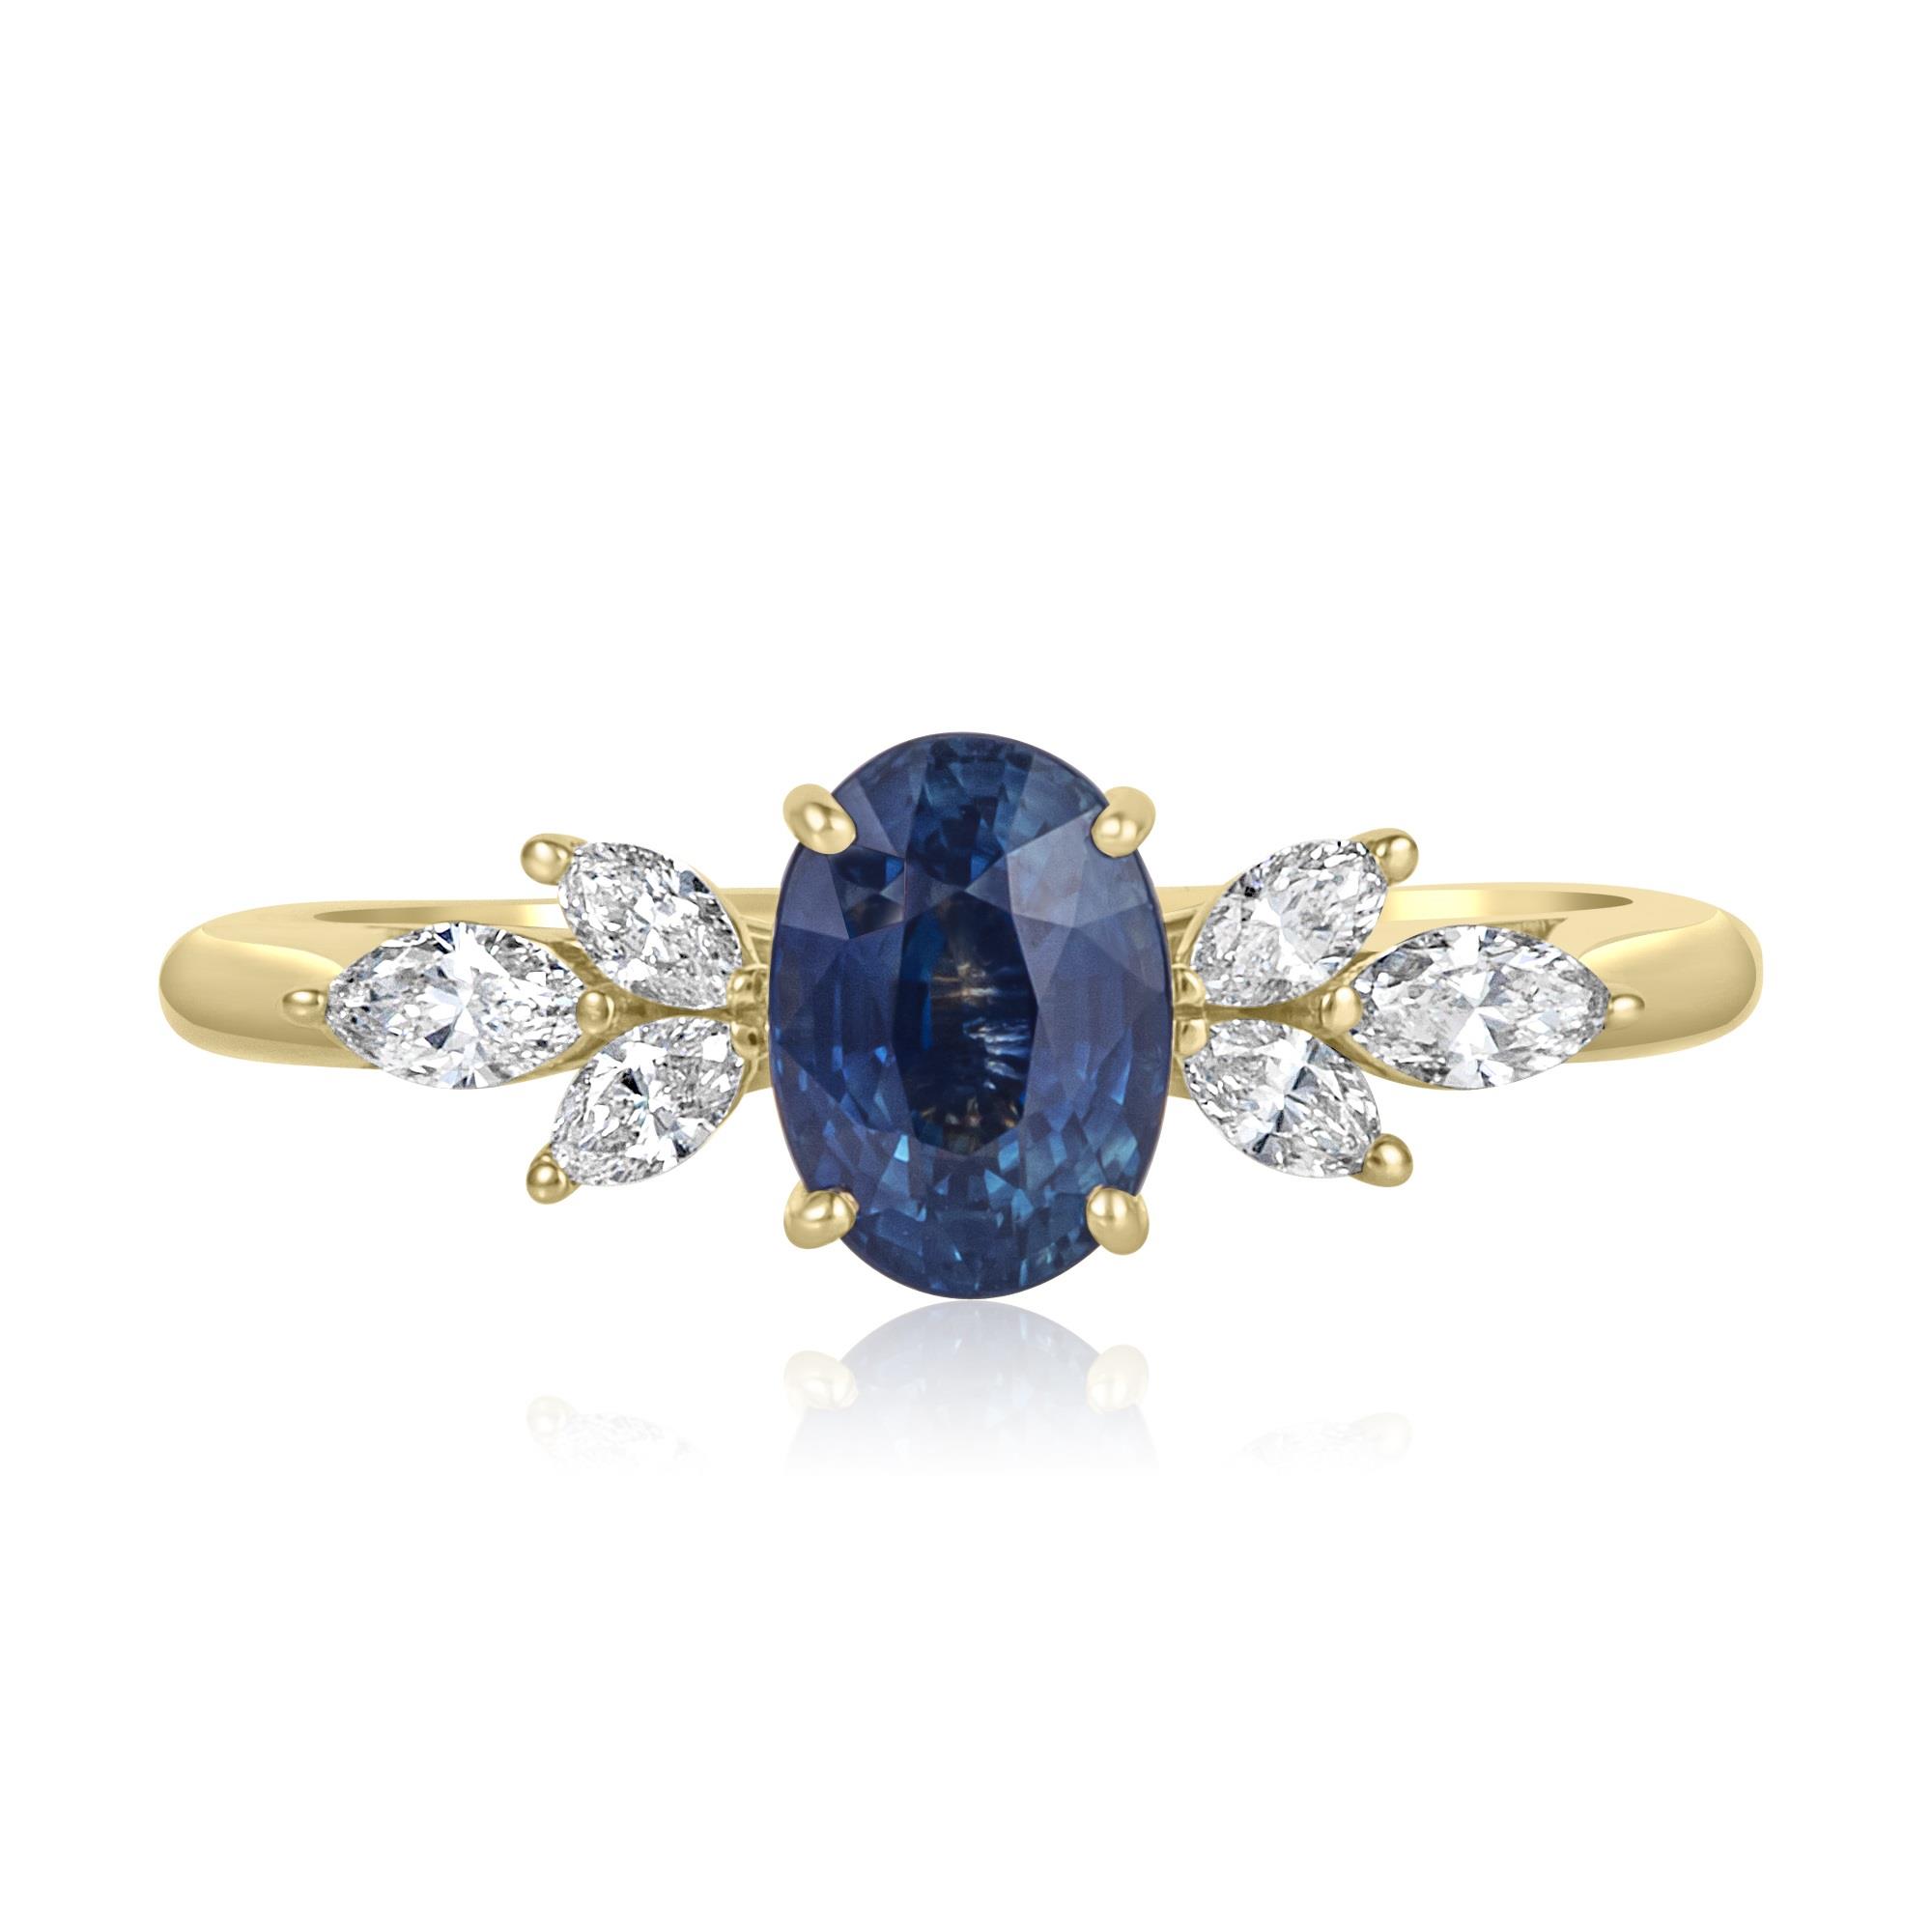 Oval Teal Sapphire and Diamond Ring | Pravins